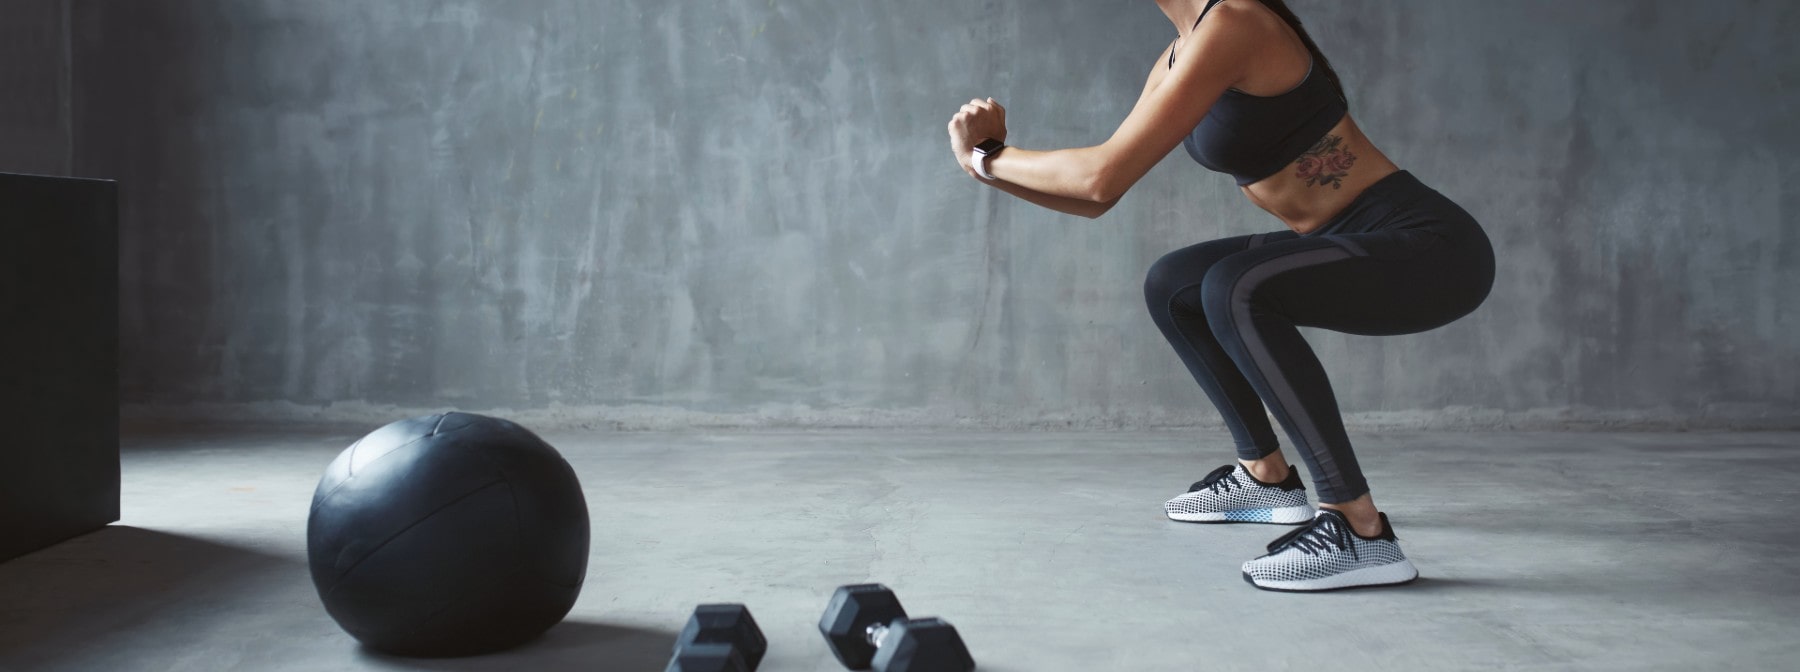 18 Exercises For a Great Dumbbell Leg Workout